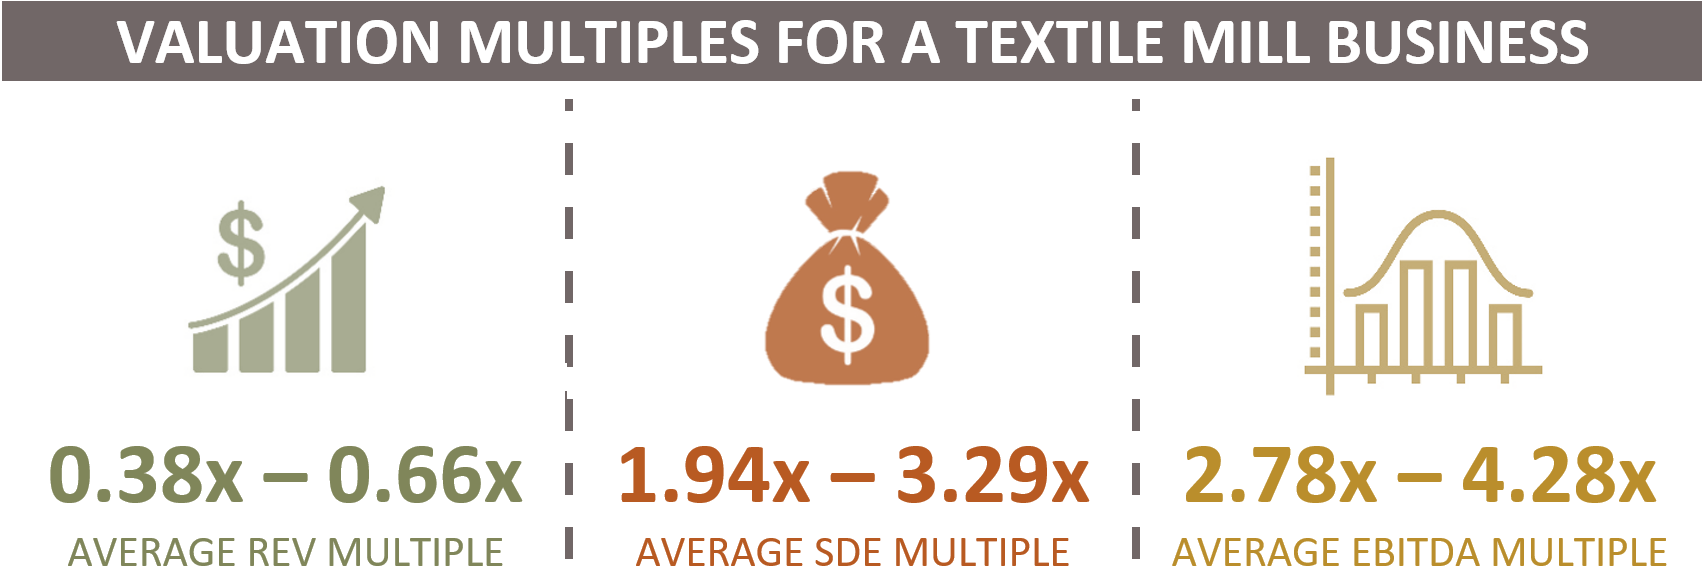 Valuation Multiples For A Textile Mill